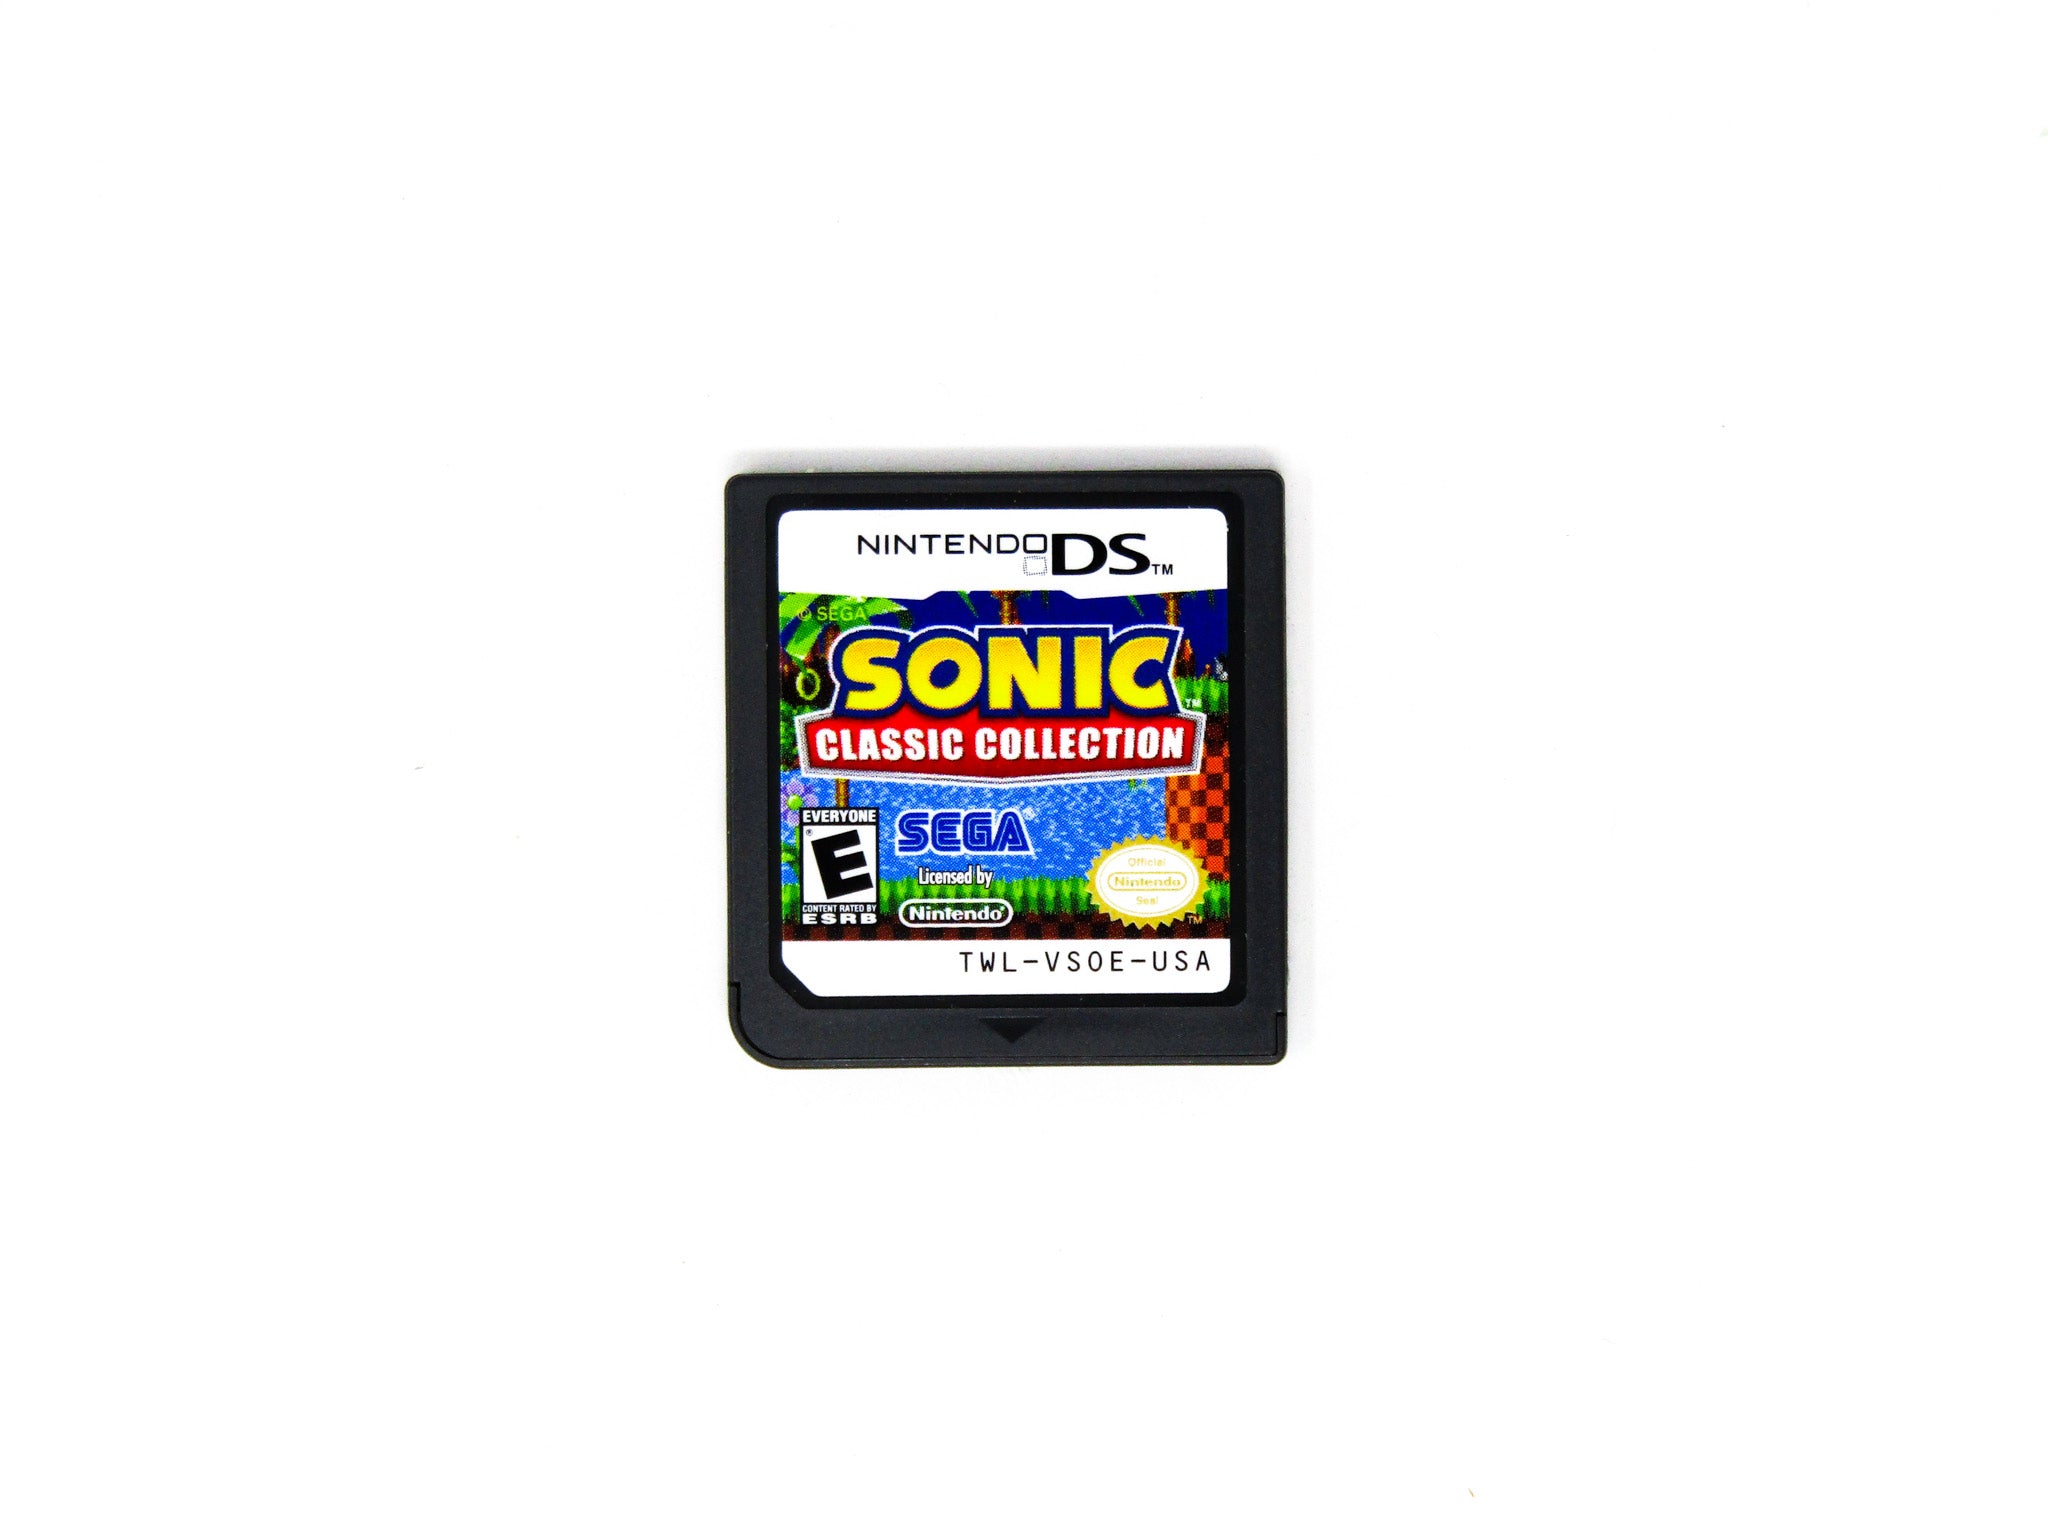 Still have the Sonic Classic Collection box for DS and manual mint